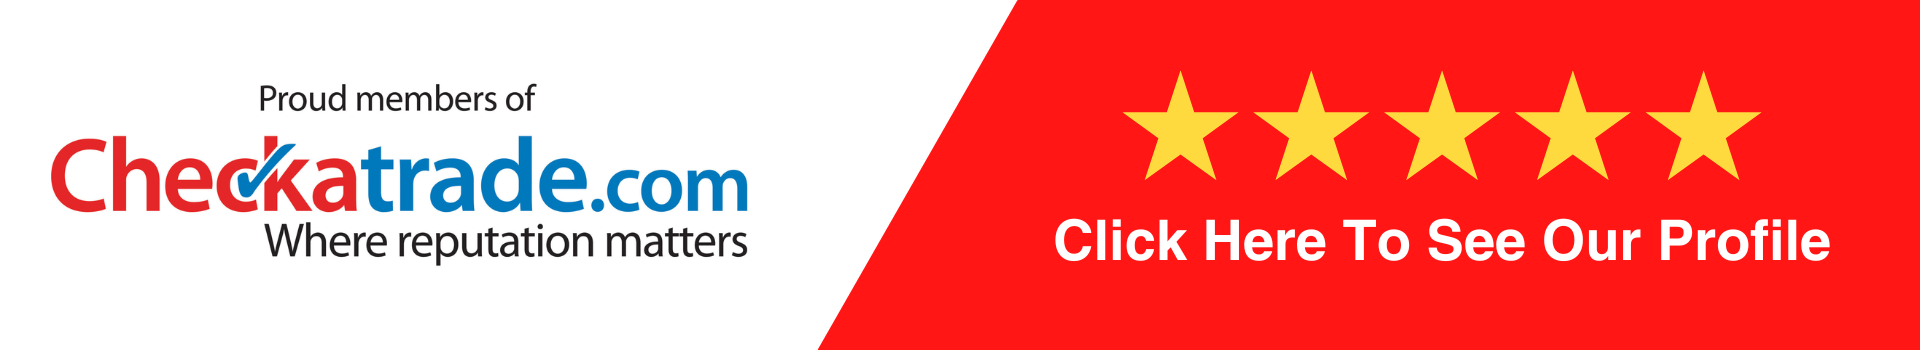 Checkatrade.com logo with a red background and five stars for flat roof services.